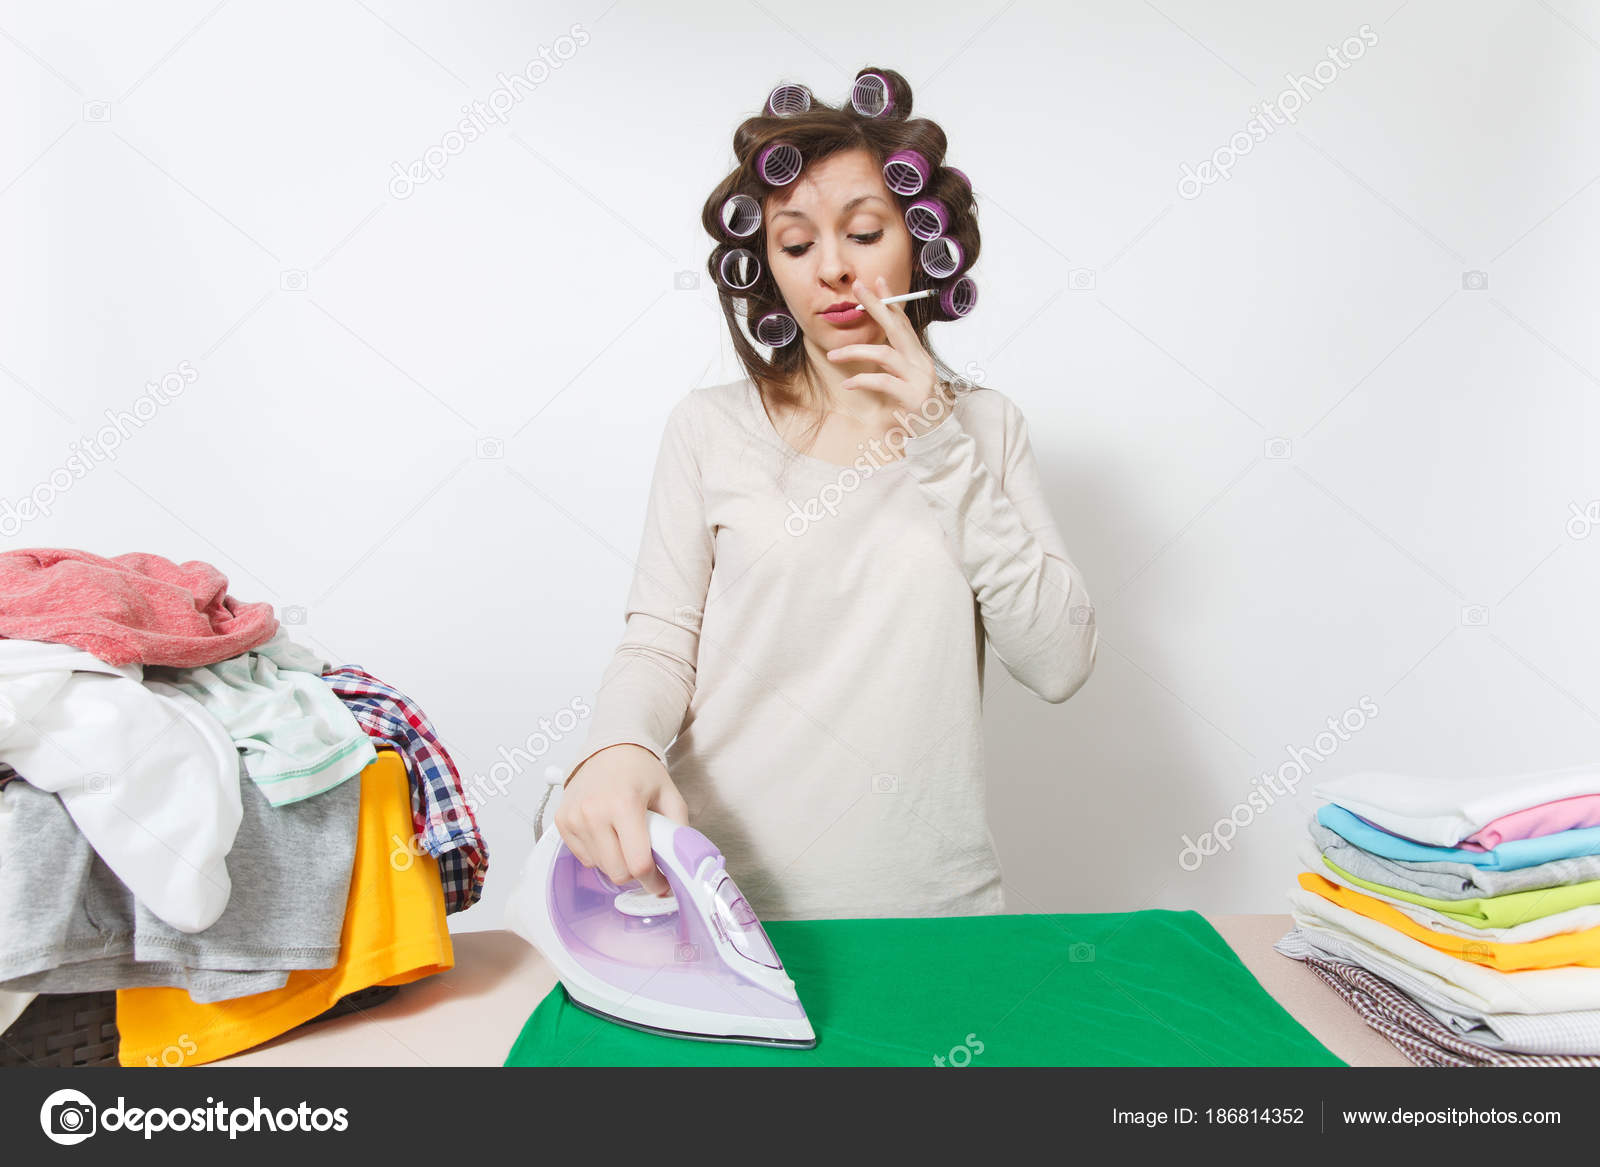 Distressed Fun Housewife With Curlers On Hair In Light Clothes